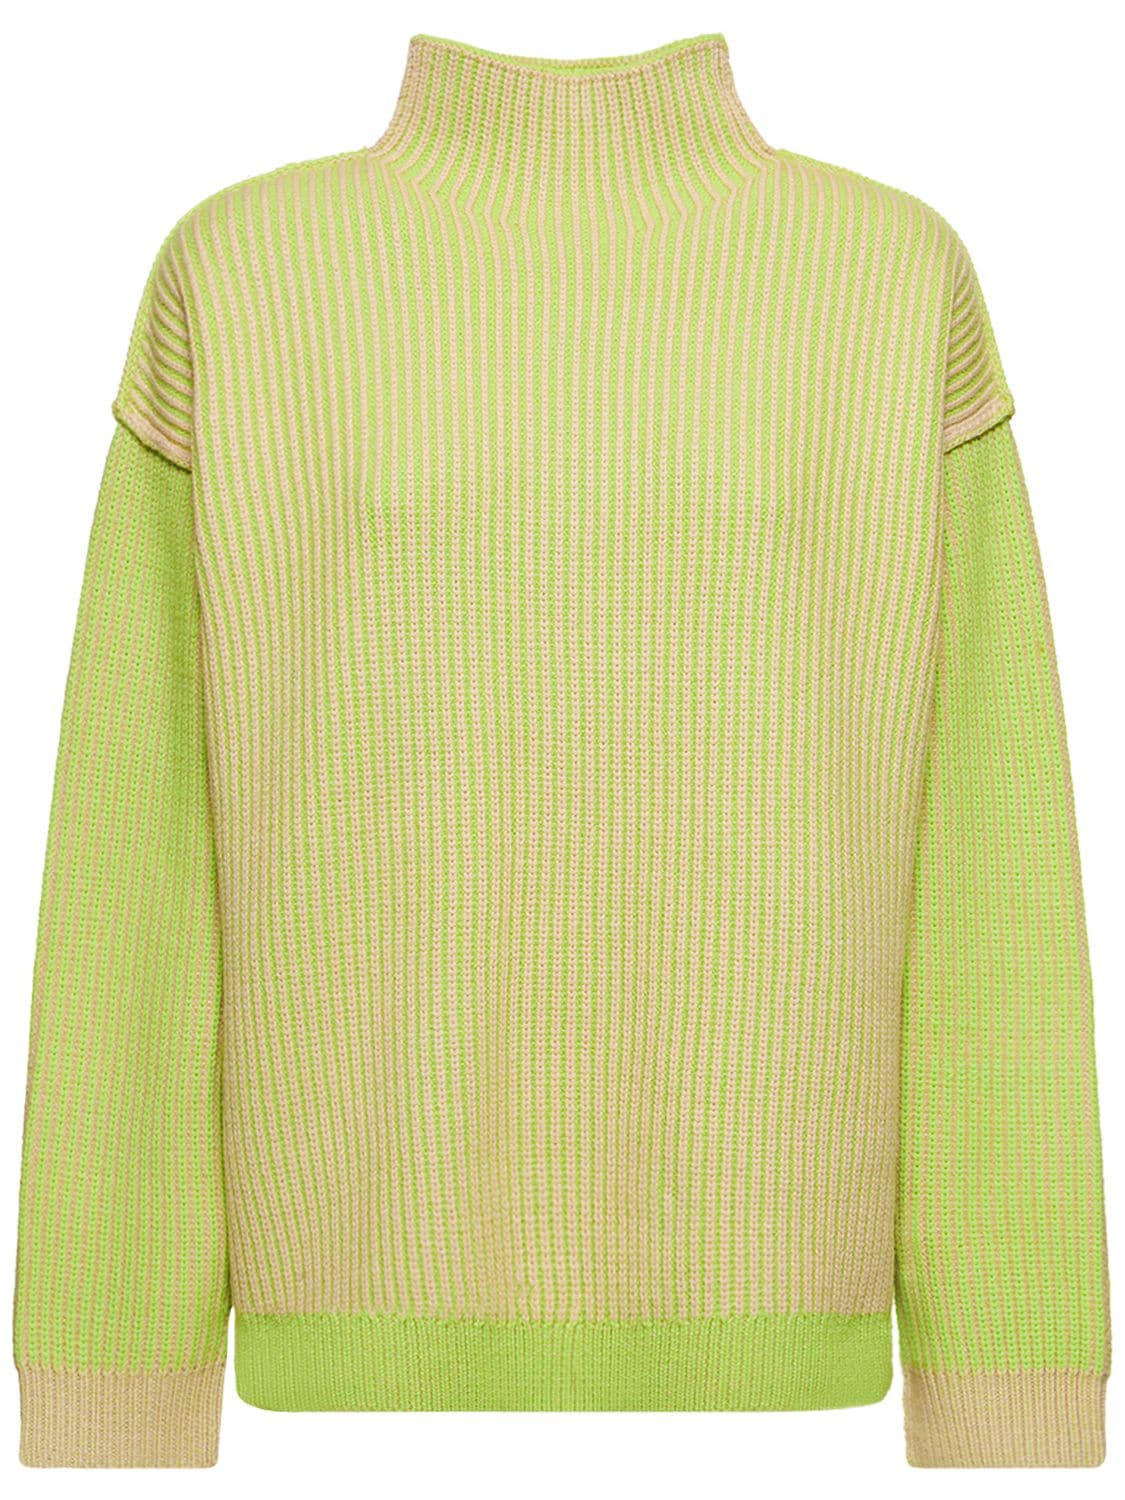 Nagnata Hinterland Sweater In Lime Green